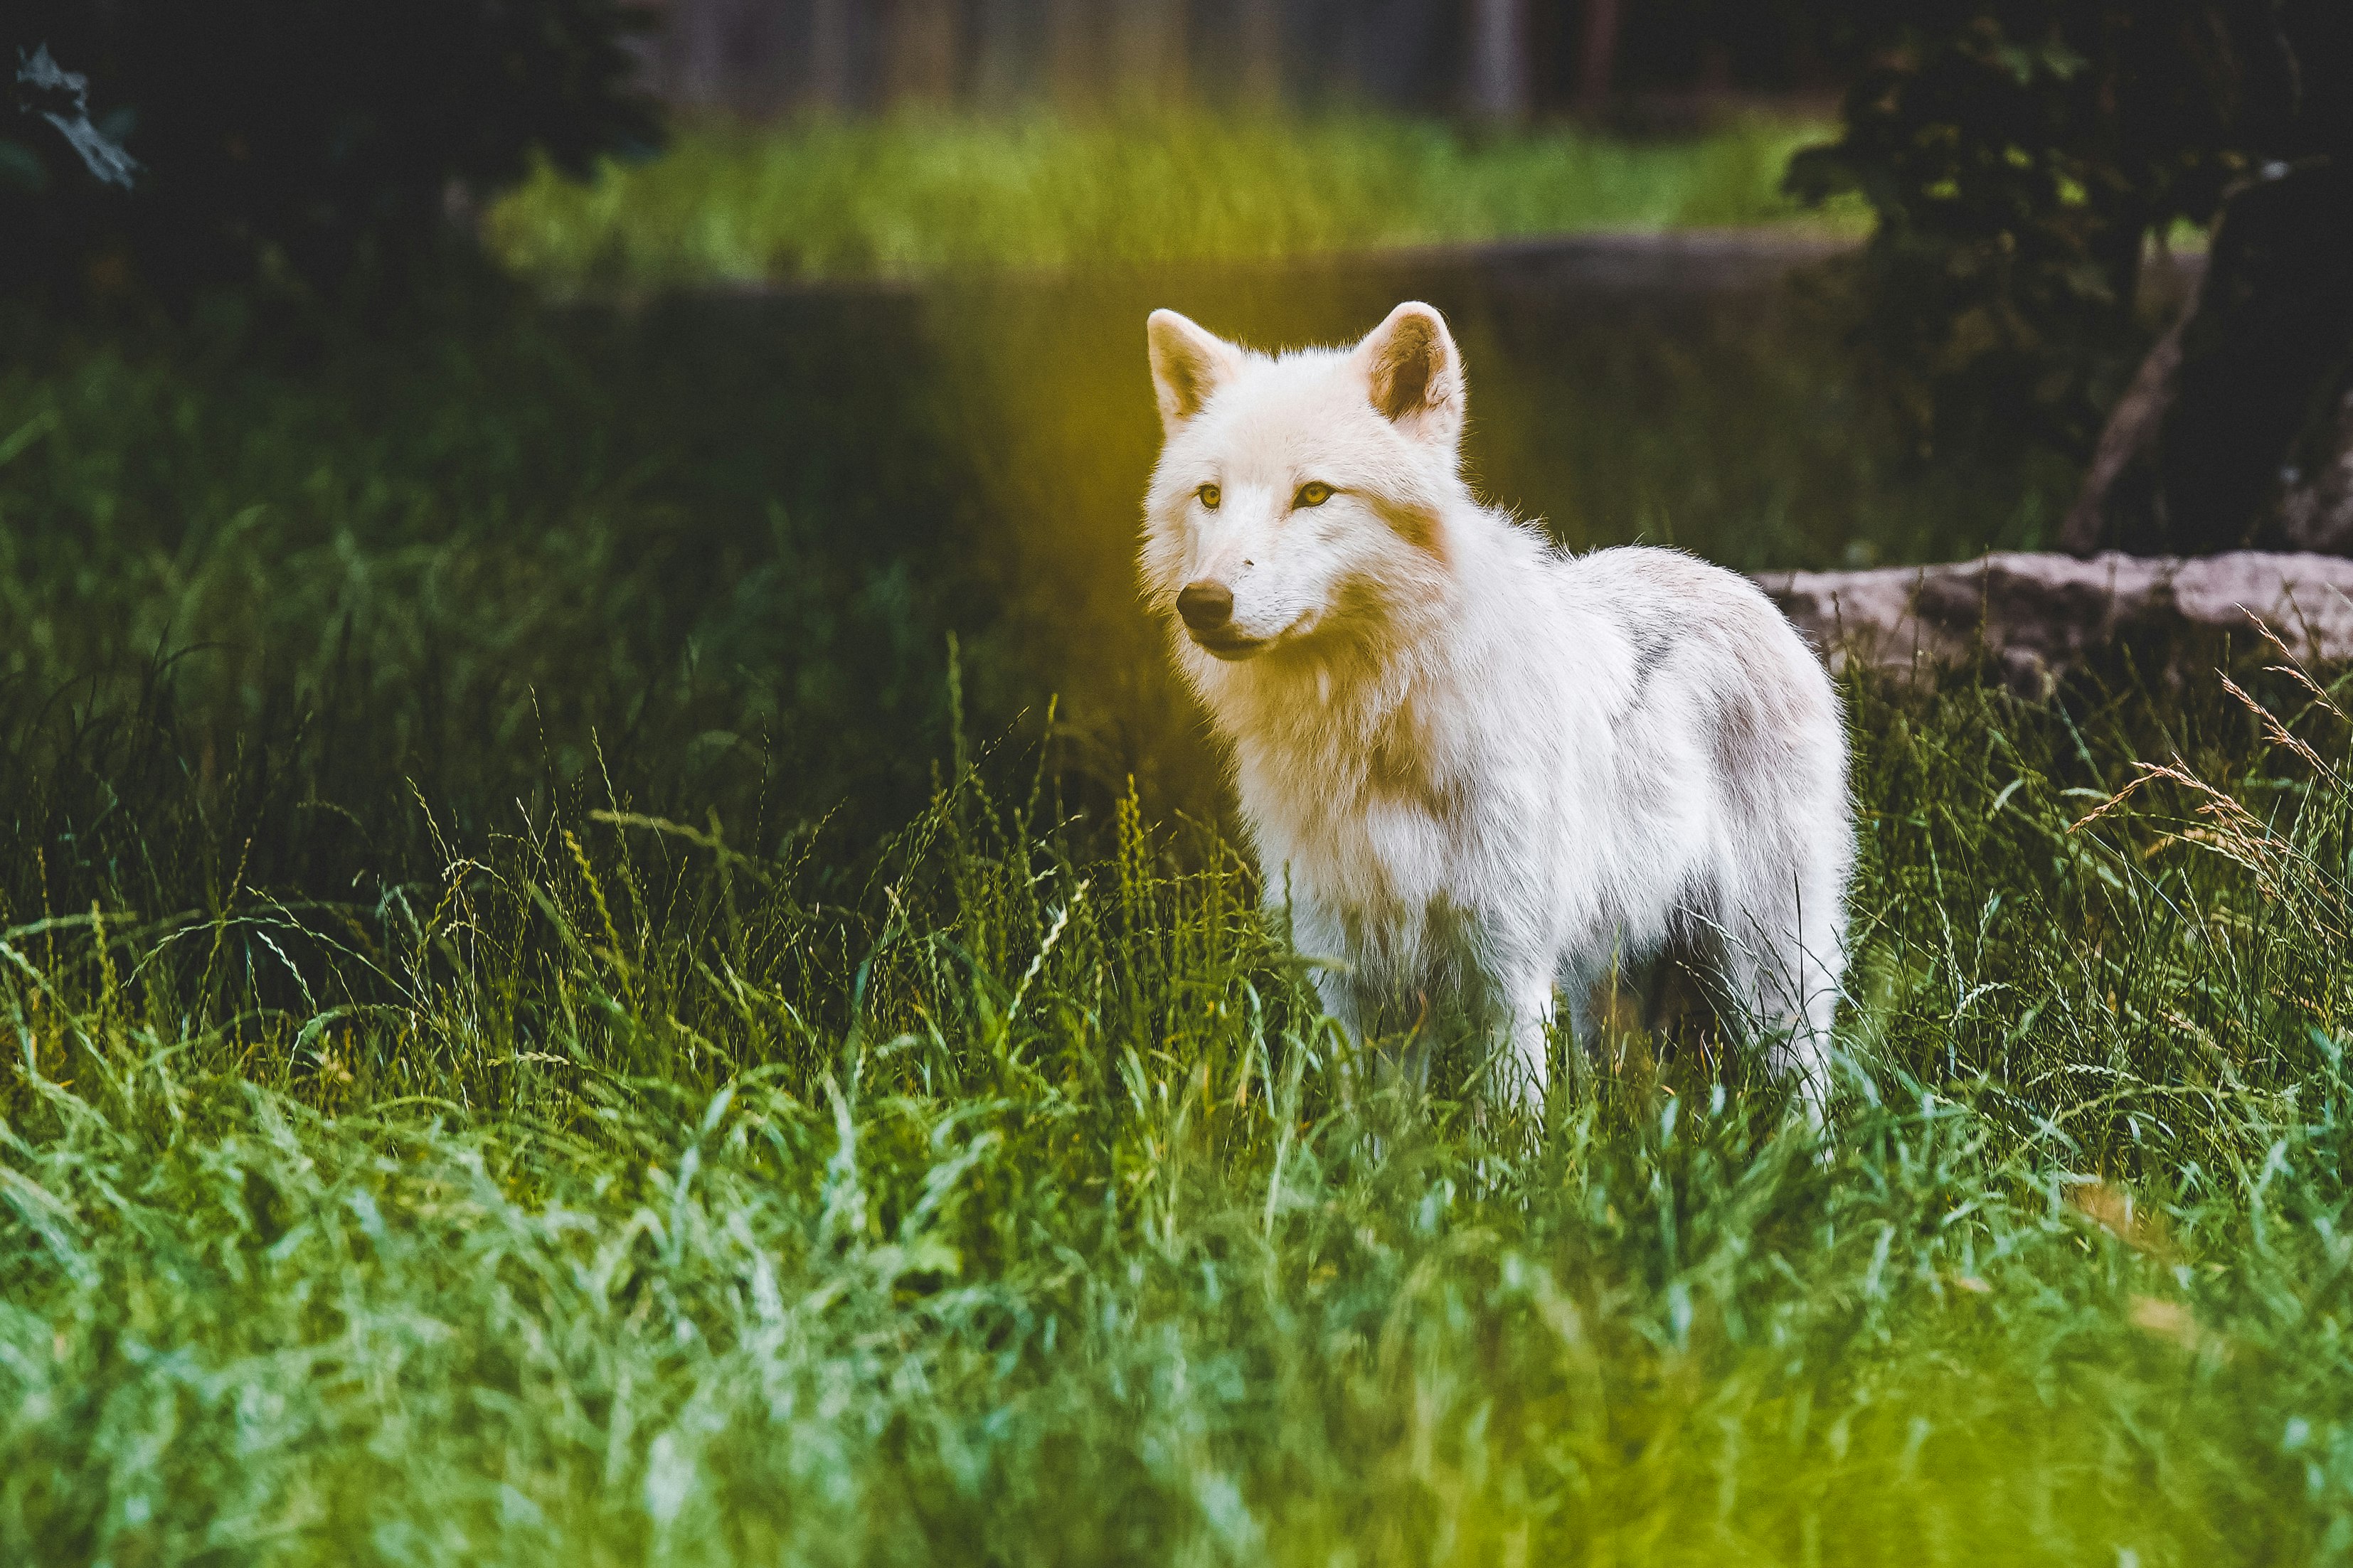 white and gray wolf on green grass field during daytime